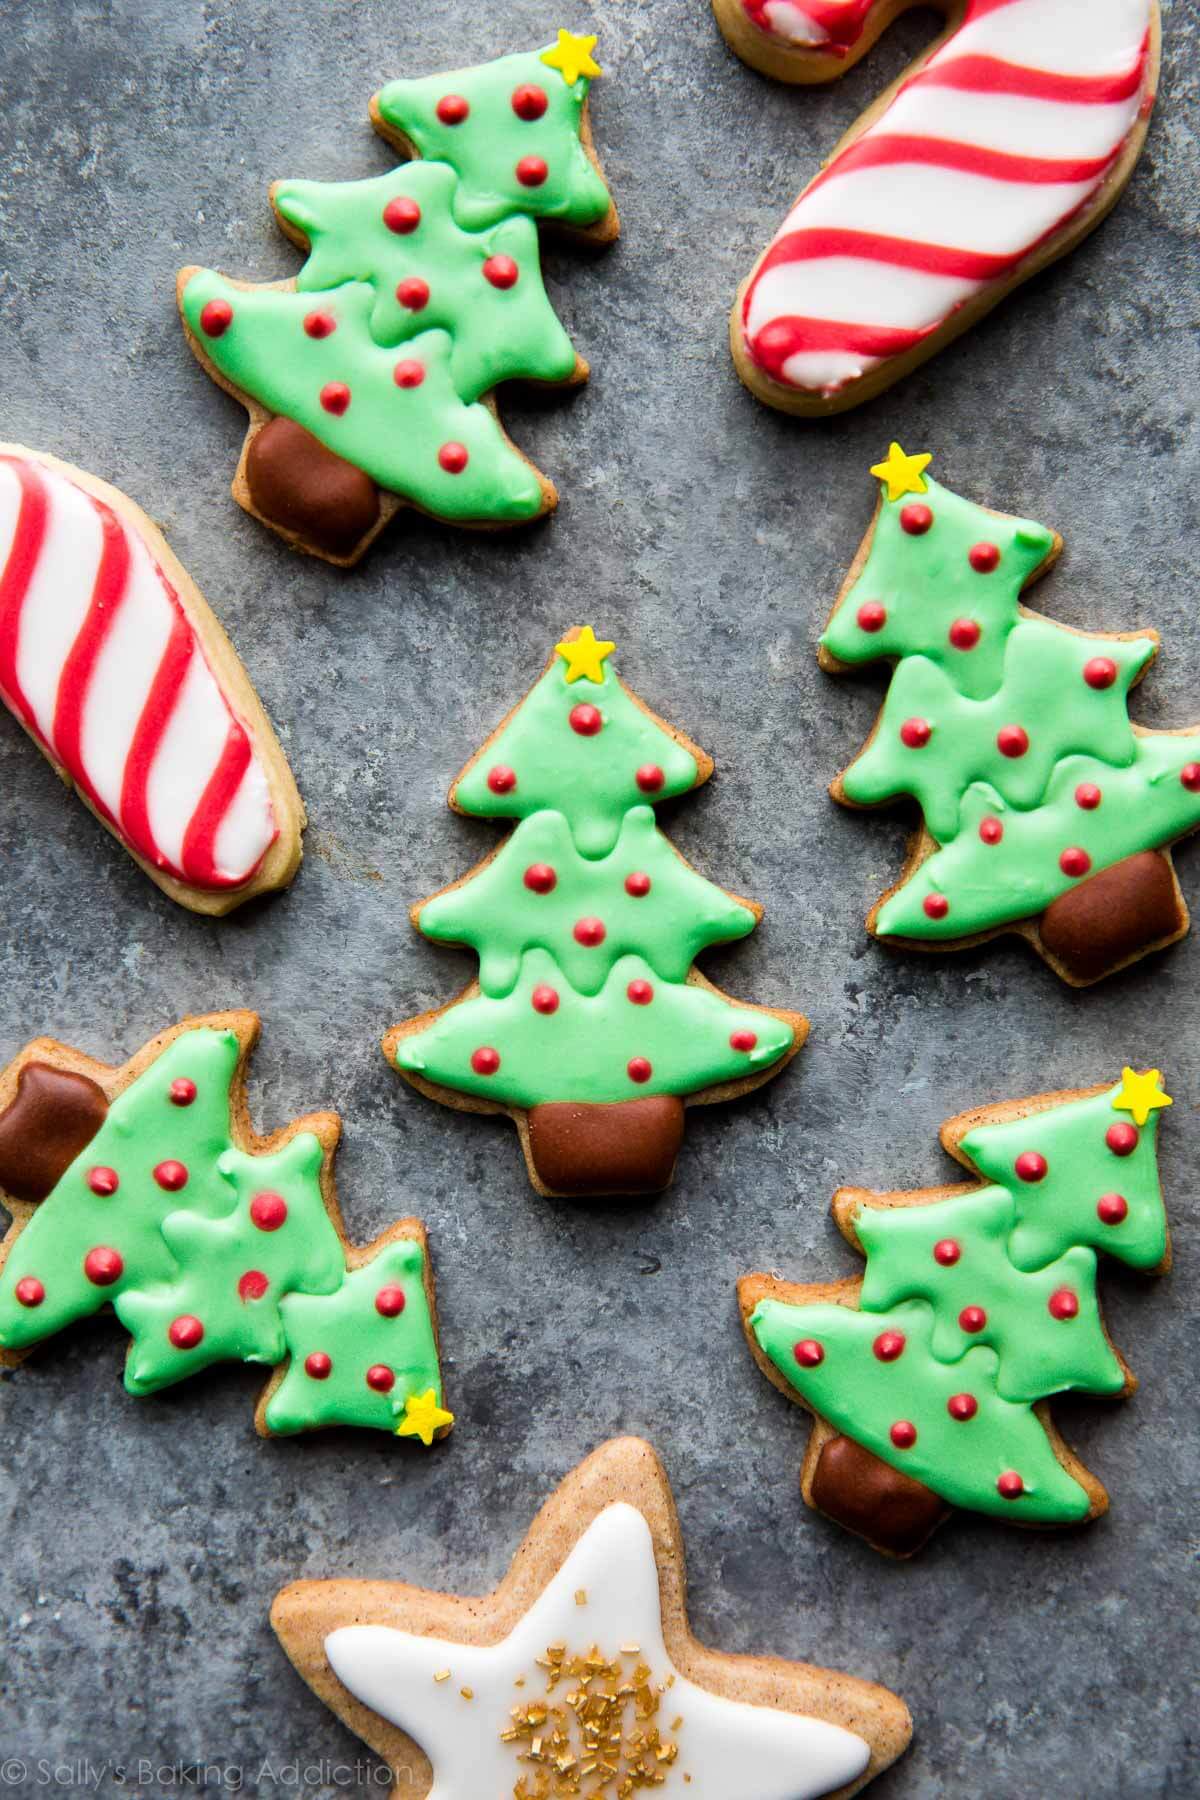 21 Of the Best Ideas for Decorated Christmas Sugar Cookies